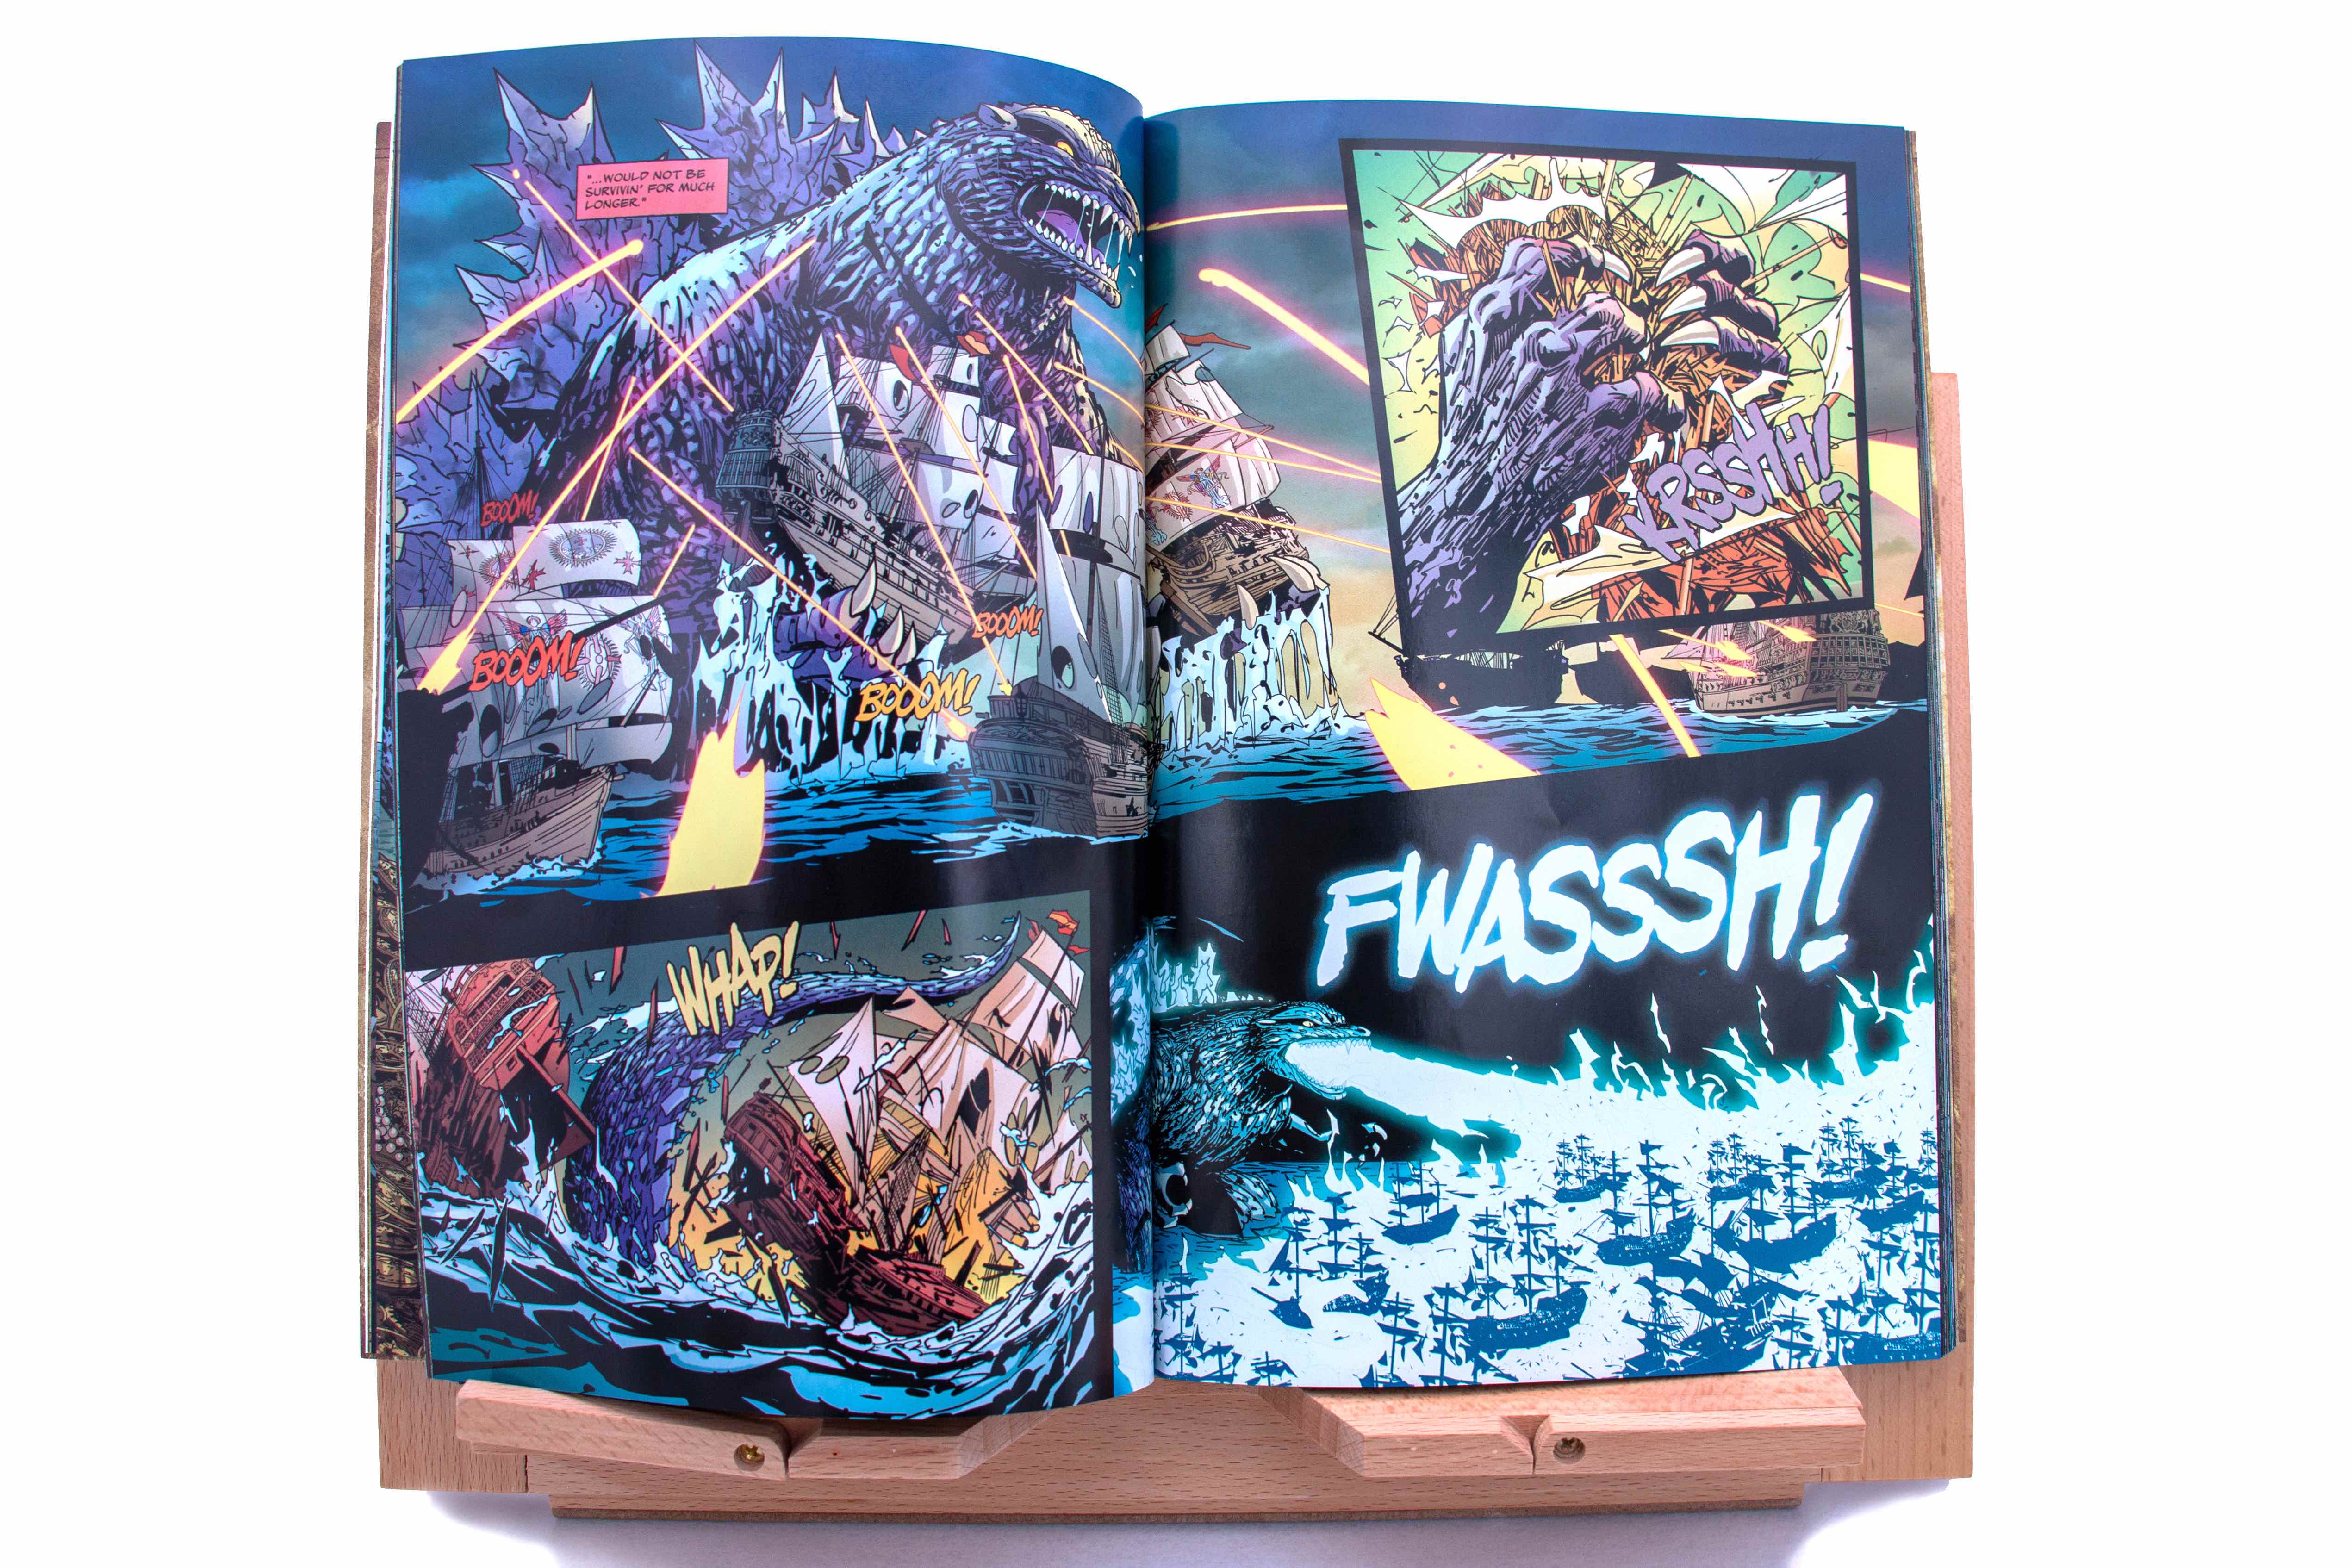 Godzilla: Here There Be Dragons - Signed IDW Exclusive